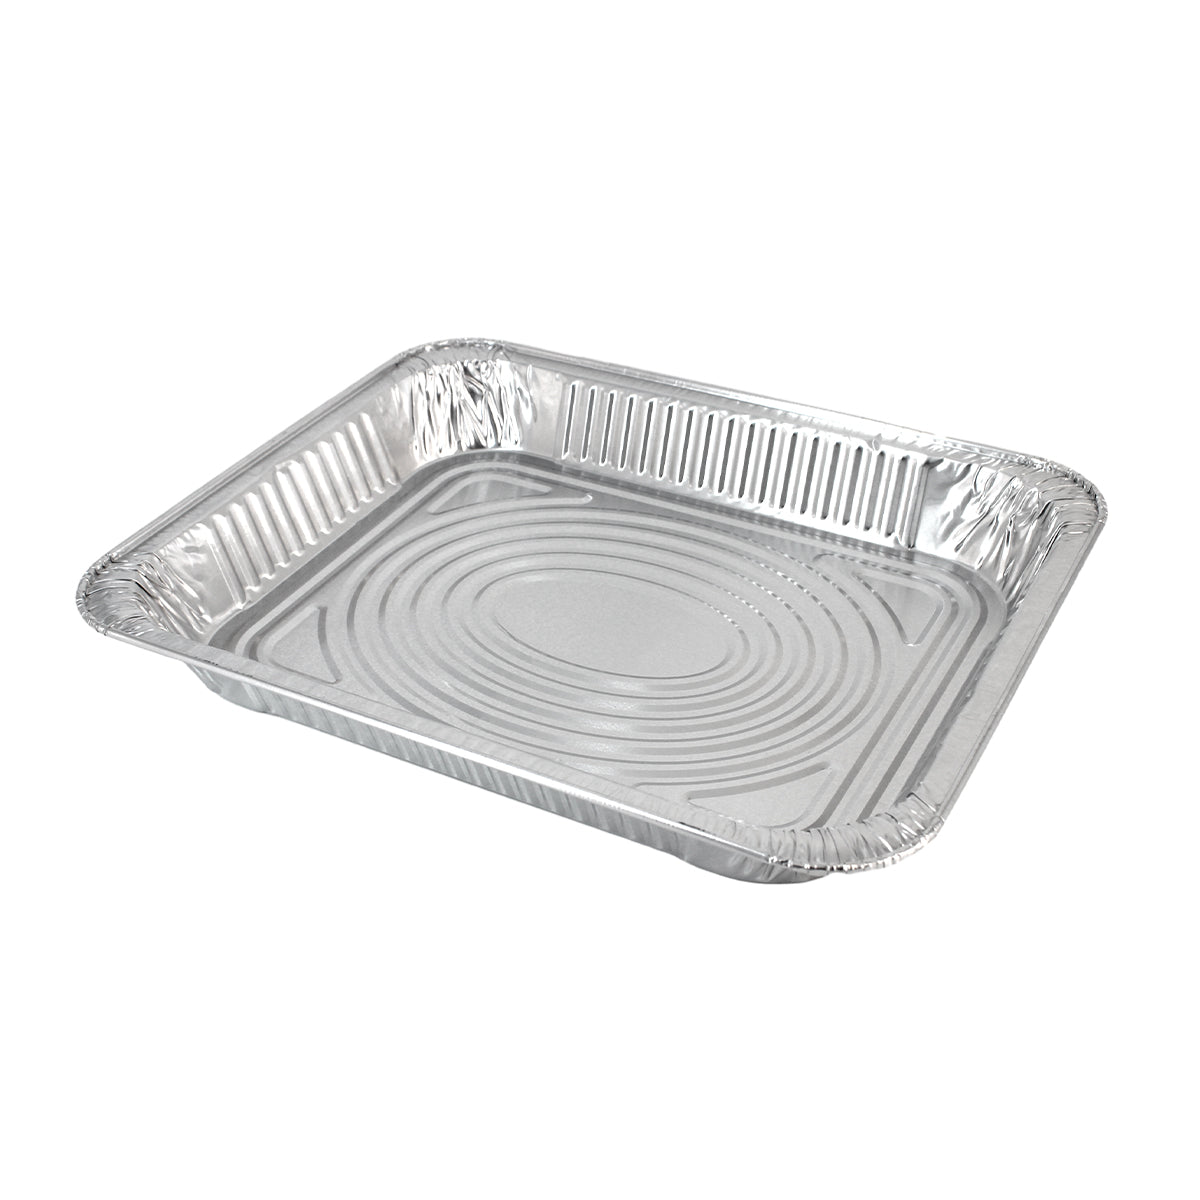 Half Size Shallow Steam Pan | Recyclable Aluminum